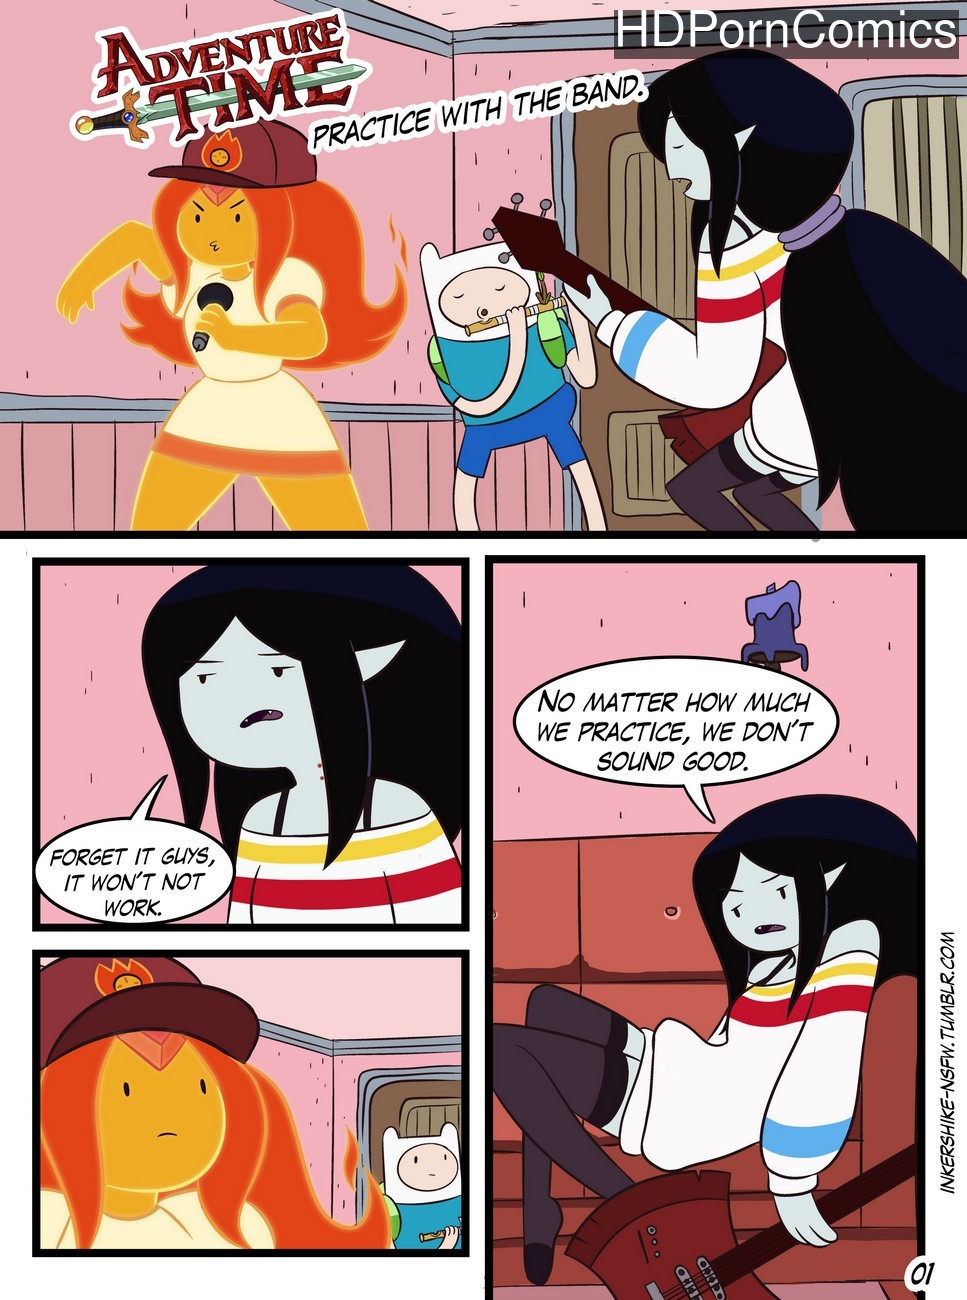 Adventure Time Porn Xxx - Adventure Time - Practice With The Band comic porn | HD Porn Comics